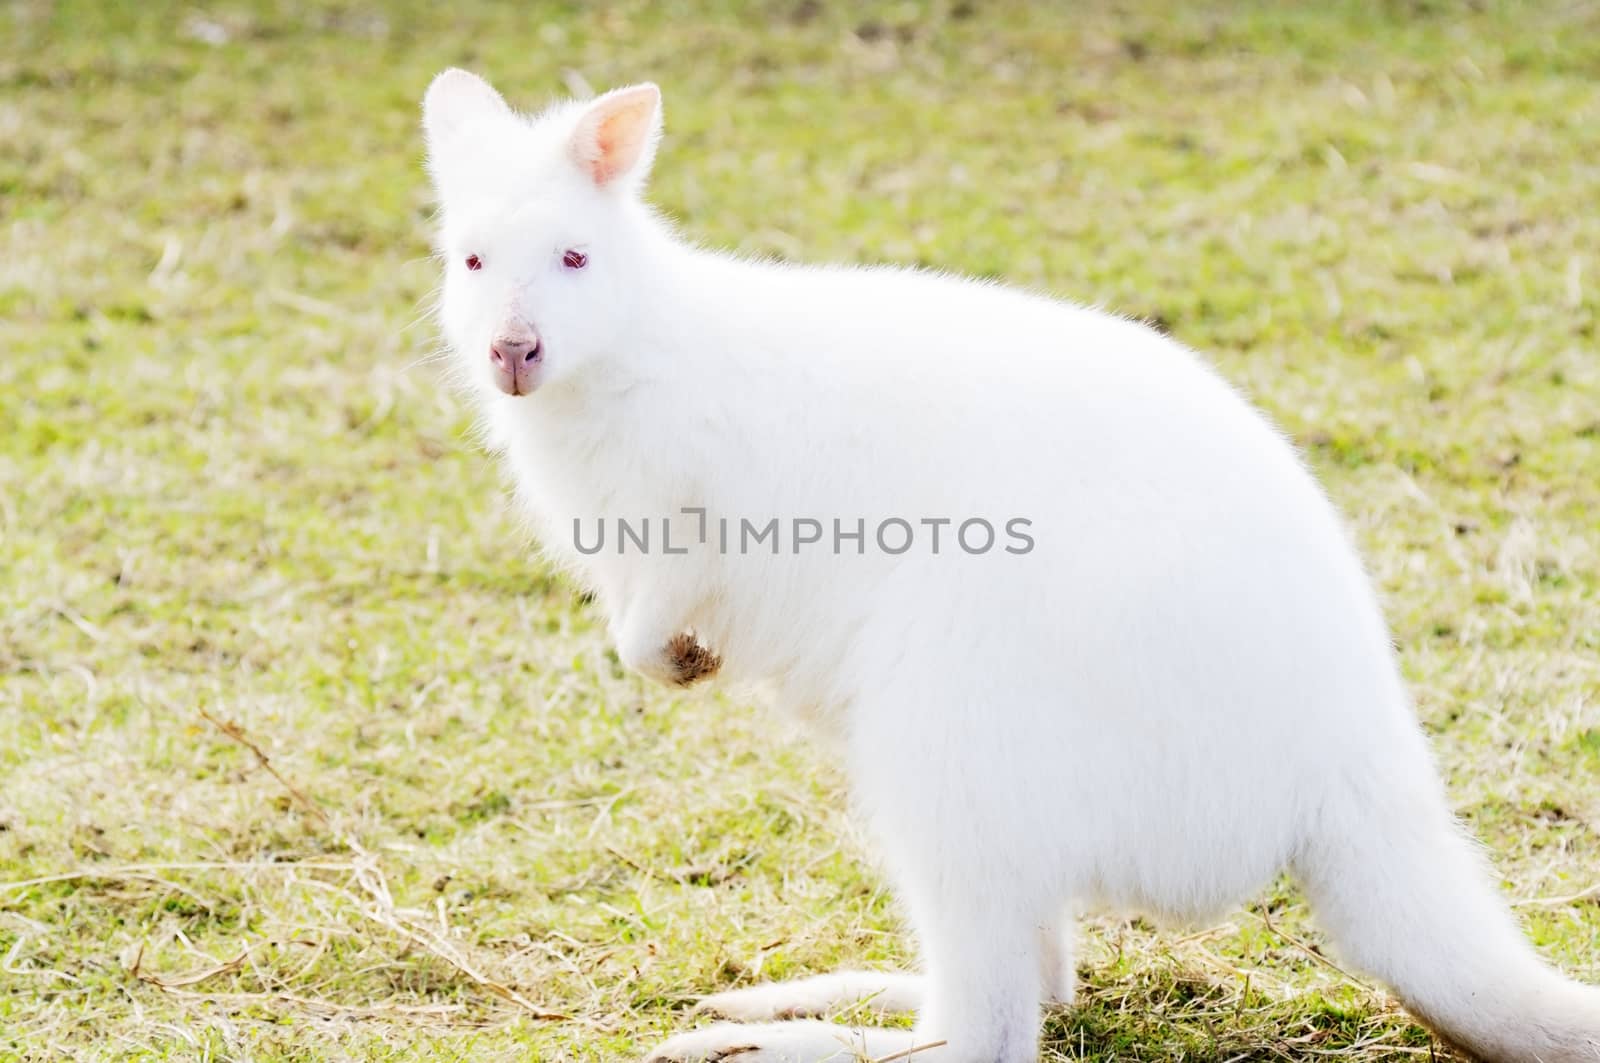 Albino wallaby by kmwphotography